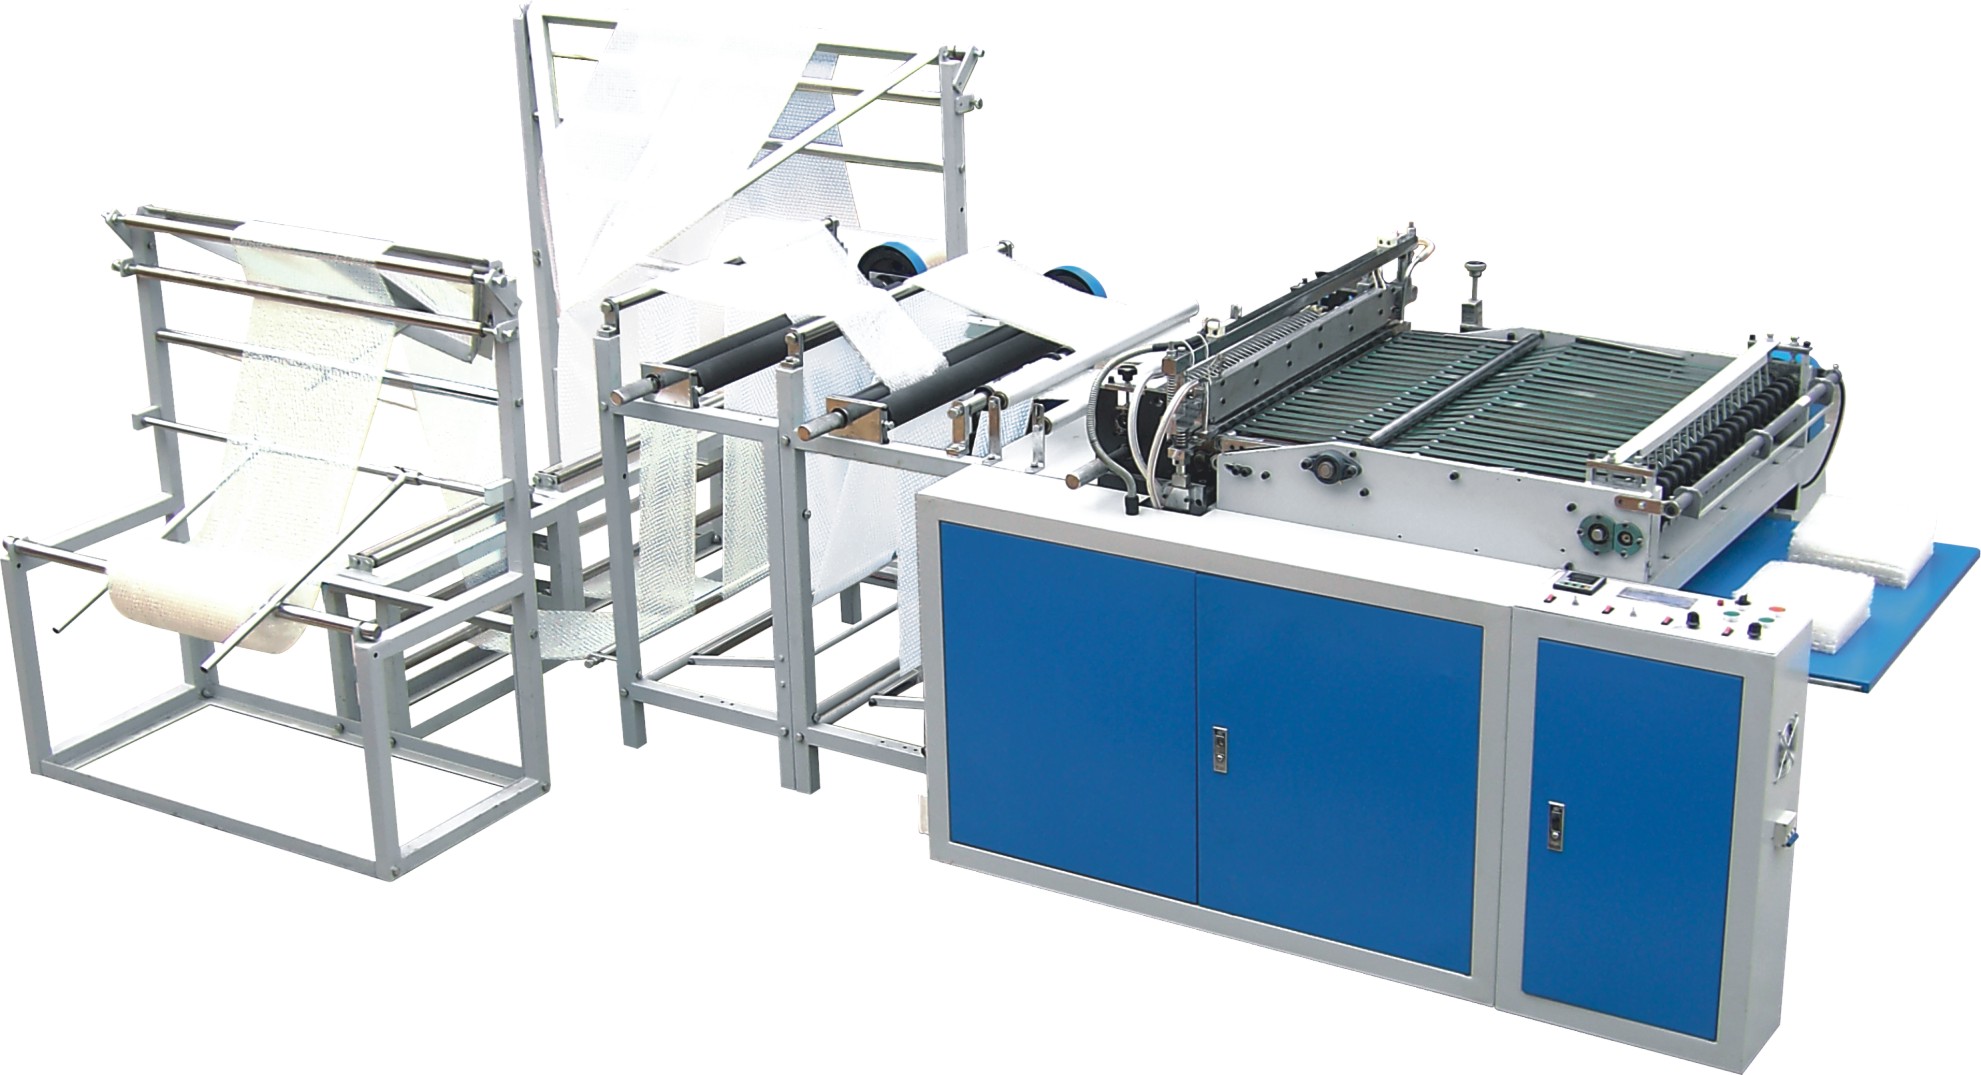 Bubble Film Roll Making Machine: A Revolutionary Solution for Post-Processing Machinery